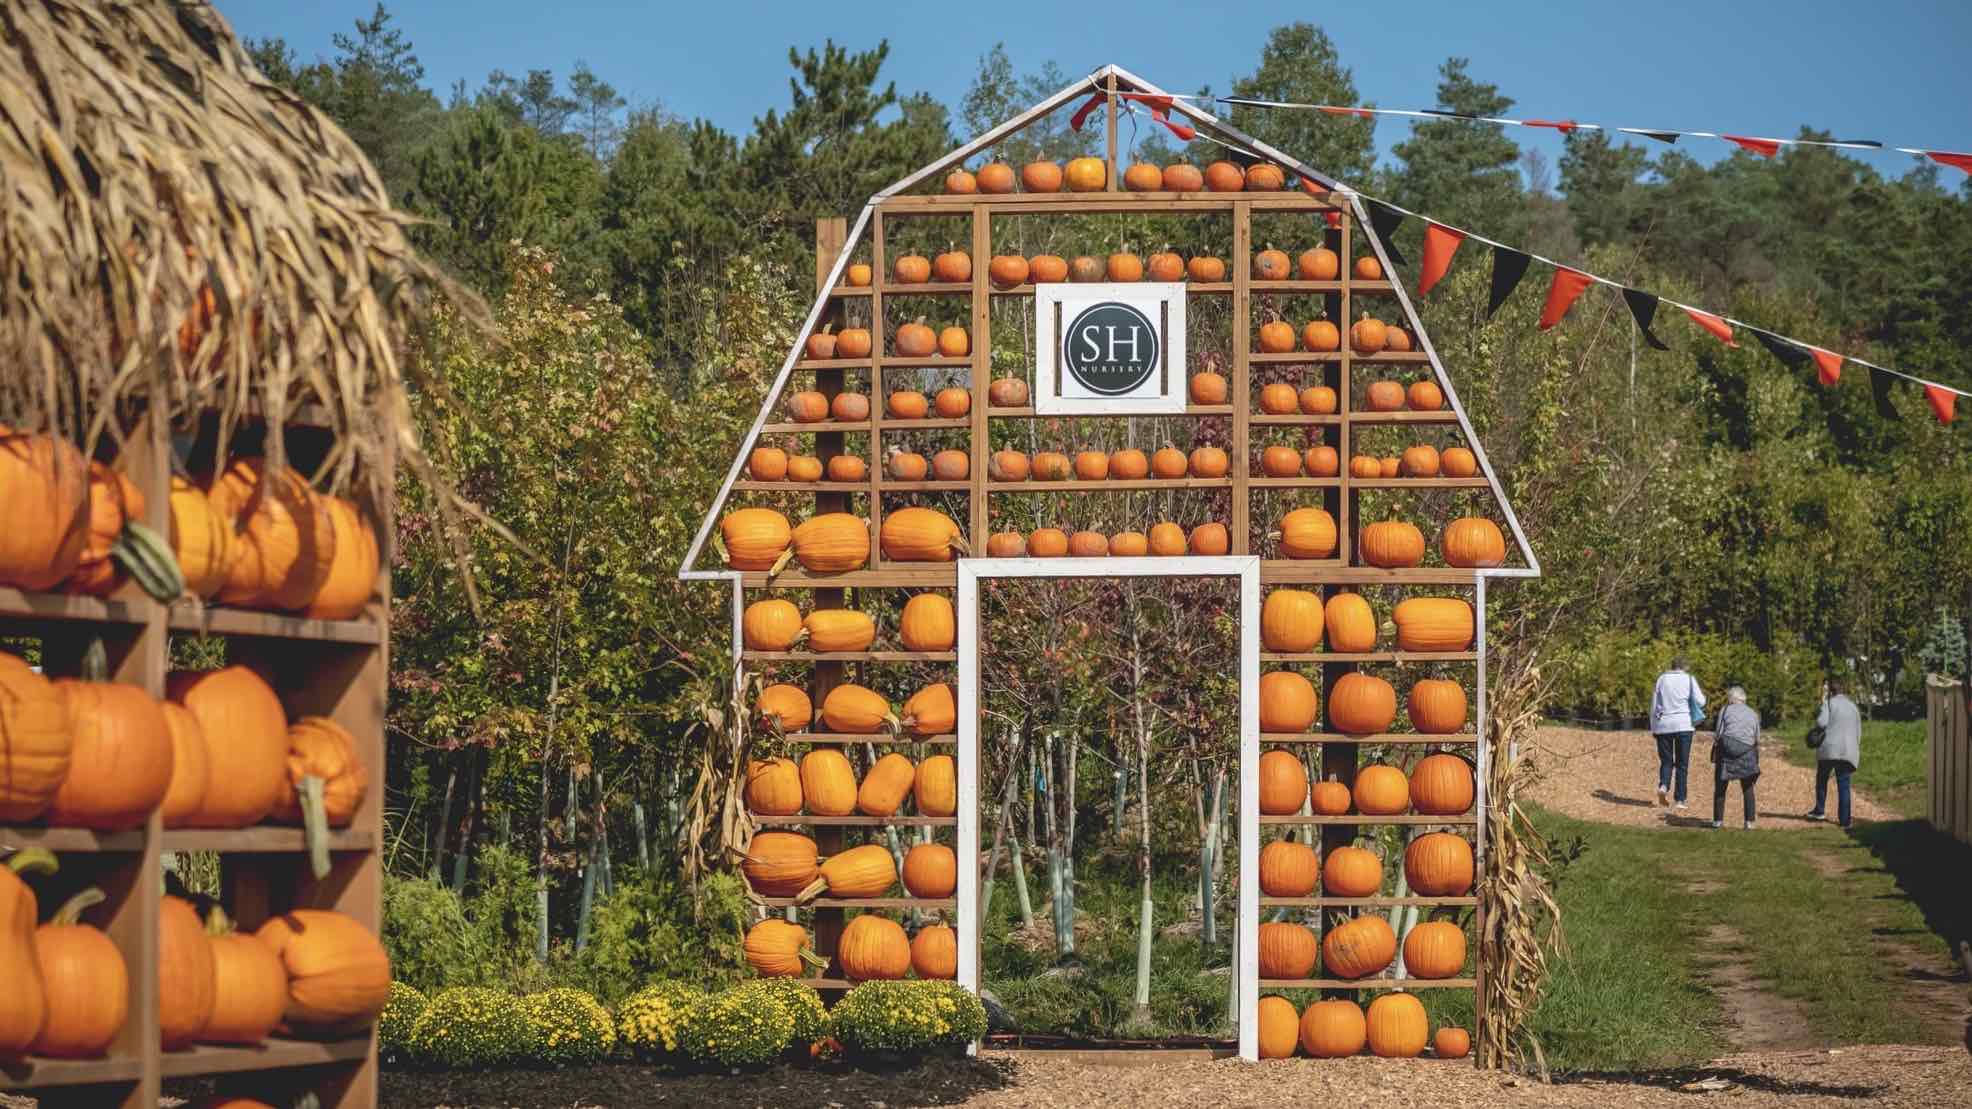 Sandhil Nursery visit with pumpkins is one of the best things to do in Huntsville this fall